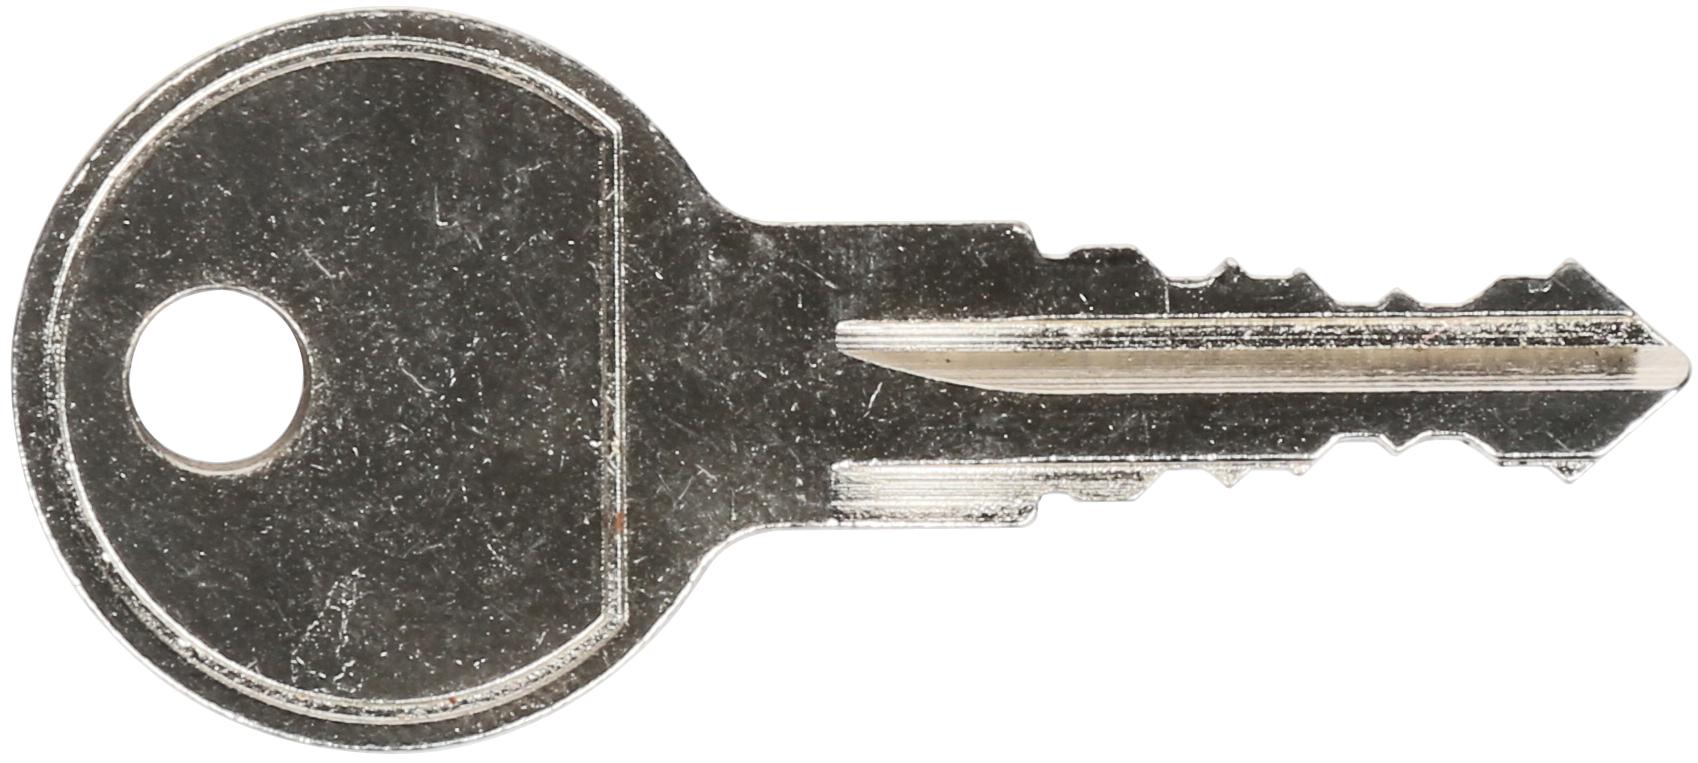 Spare Roof Box Key 095